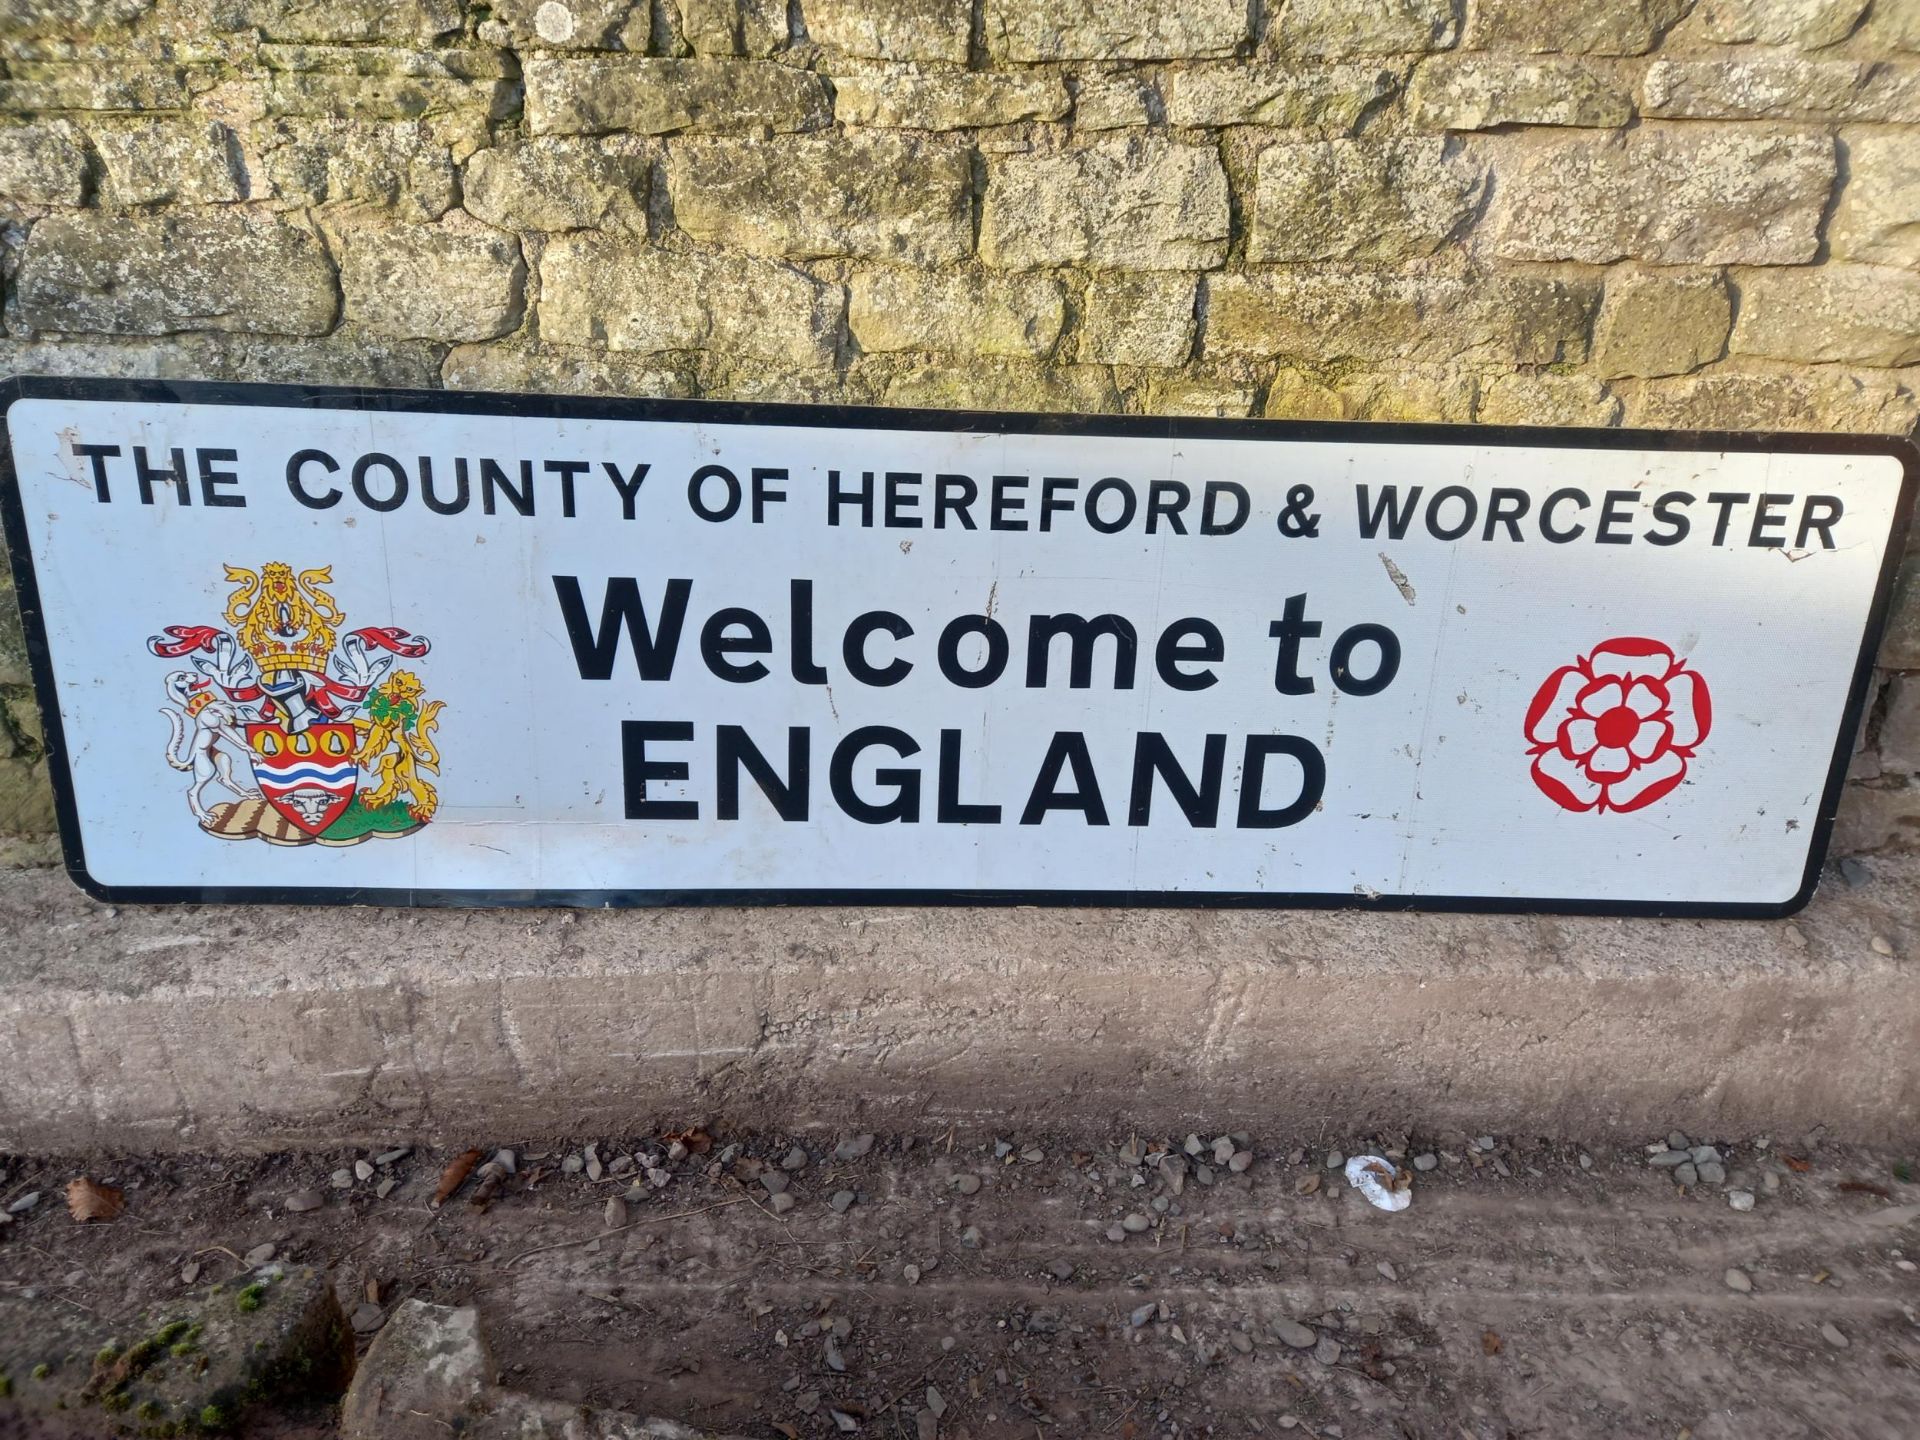 Road sign- Welcome to England 2400x600mm. Proceeds to British Red Cross Ukraine crisis appeal.